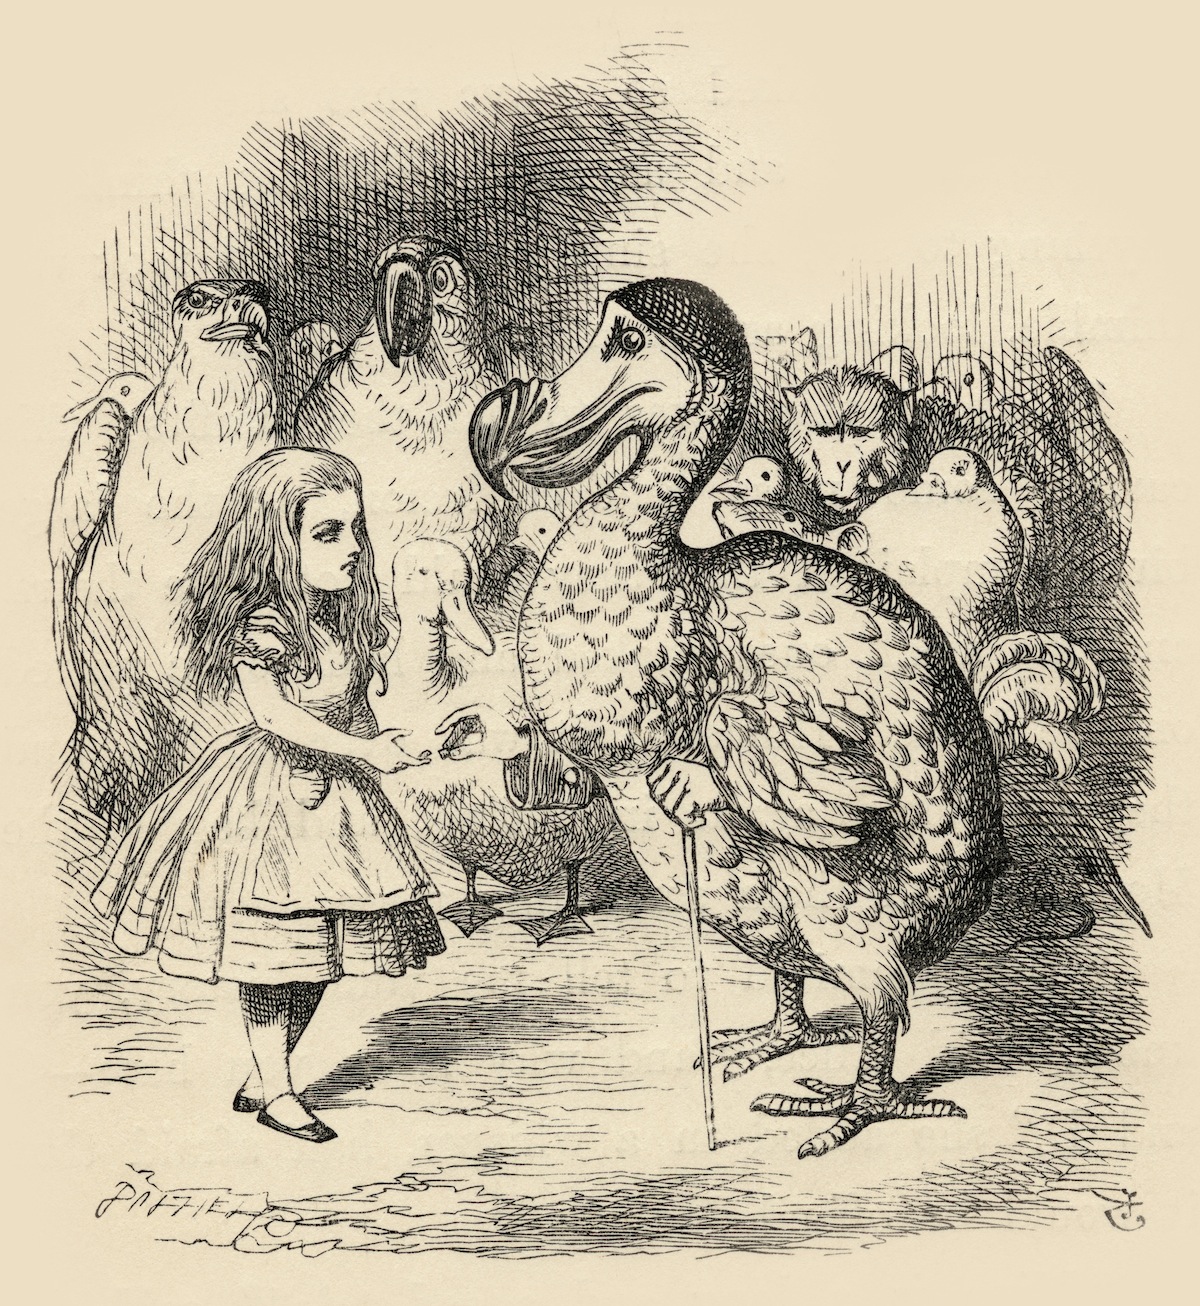 The Dodo solemnly presents Alice with a thimble Illustration by John Tenniel from the book Alices's Adventures in Wonderland by Lewis Carroll (Universal Images Group / Getty Images)